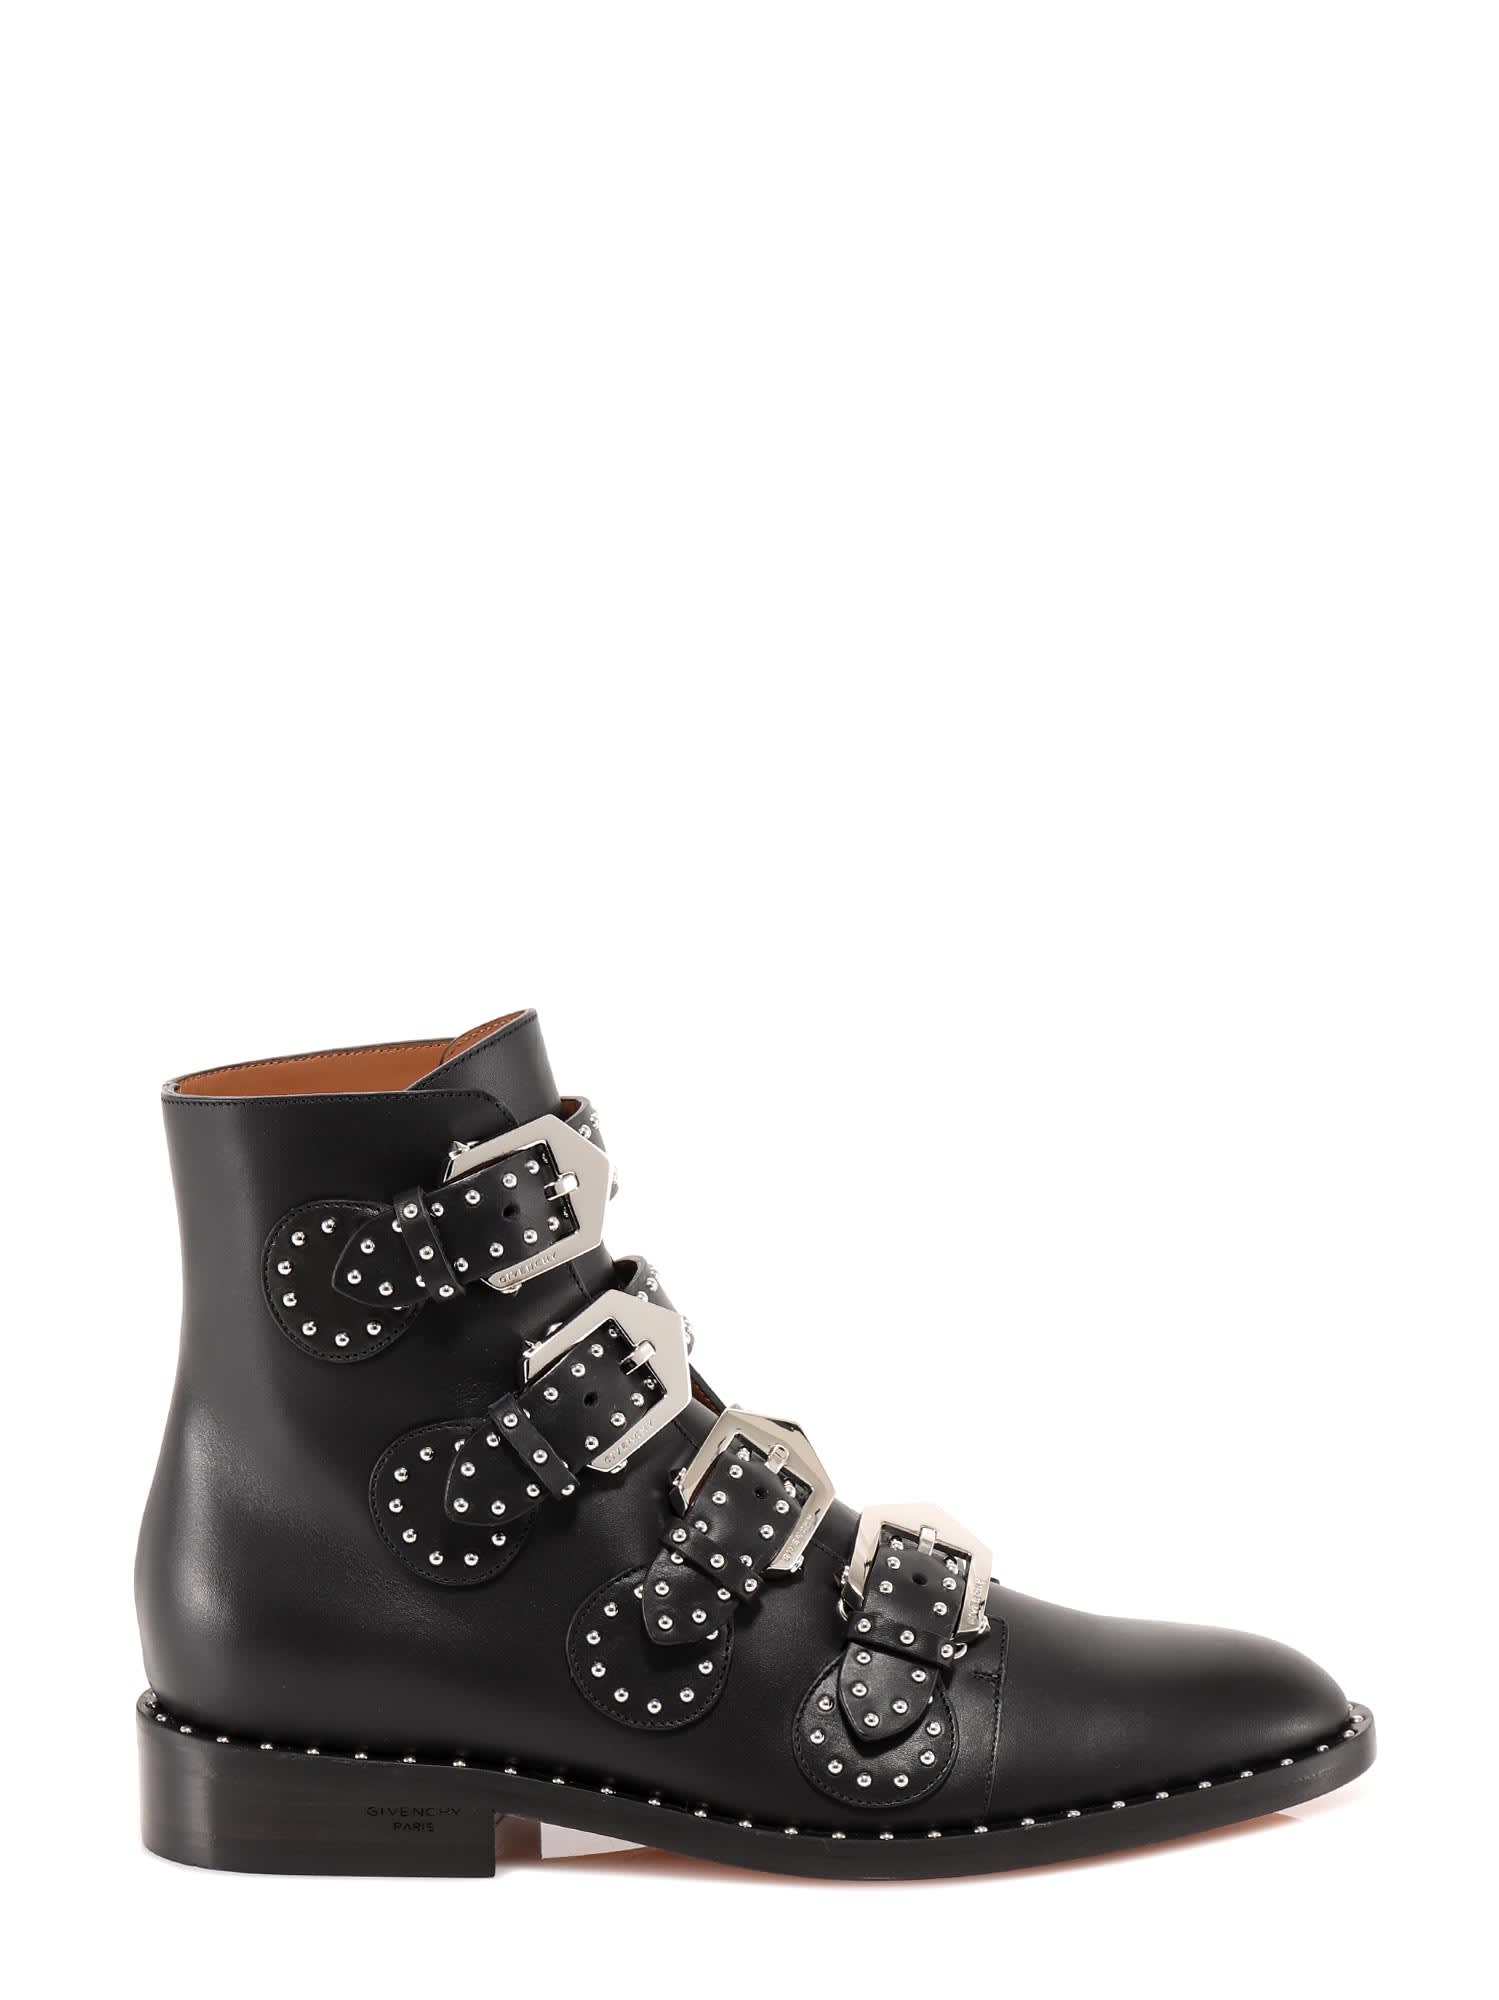 Buy Givenchy Studded Buckled Boots online, shop Givenchy shoes with free shipping